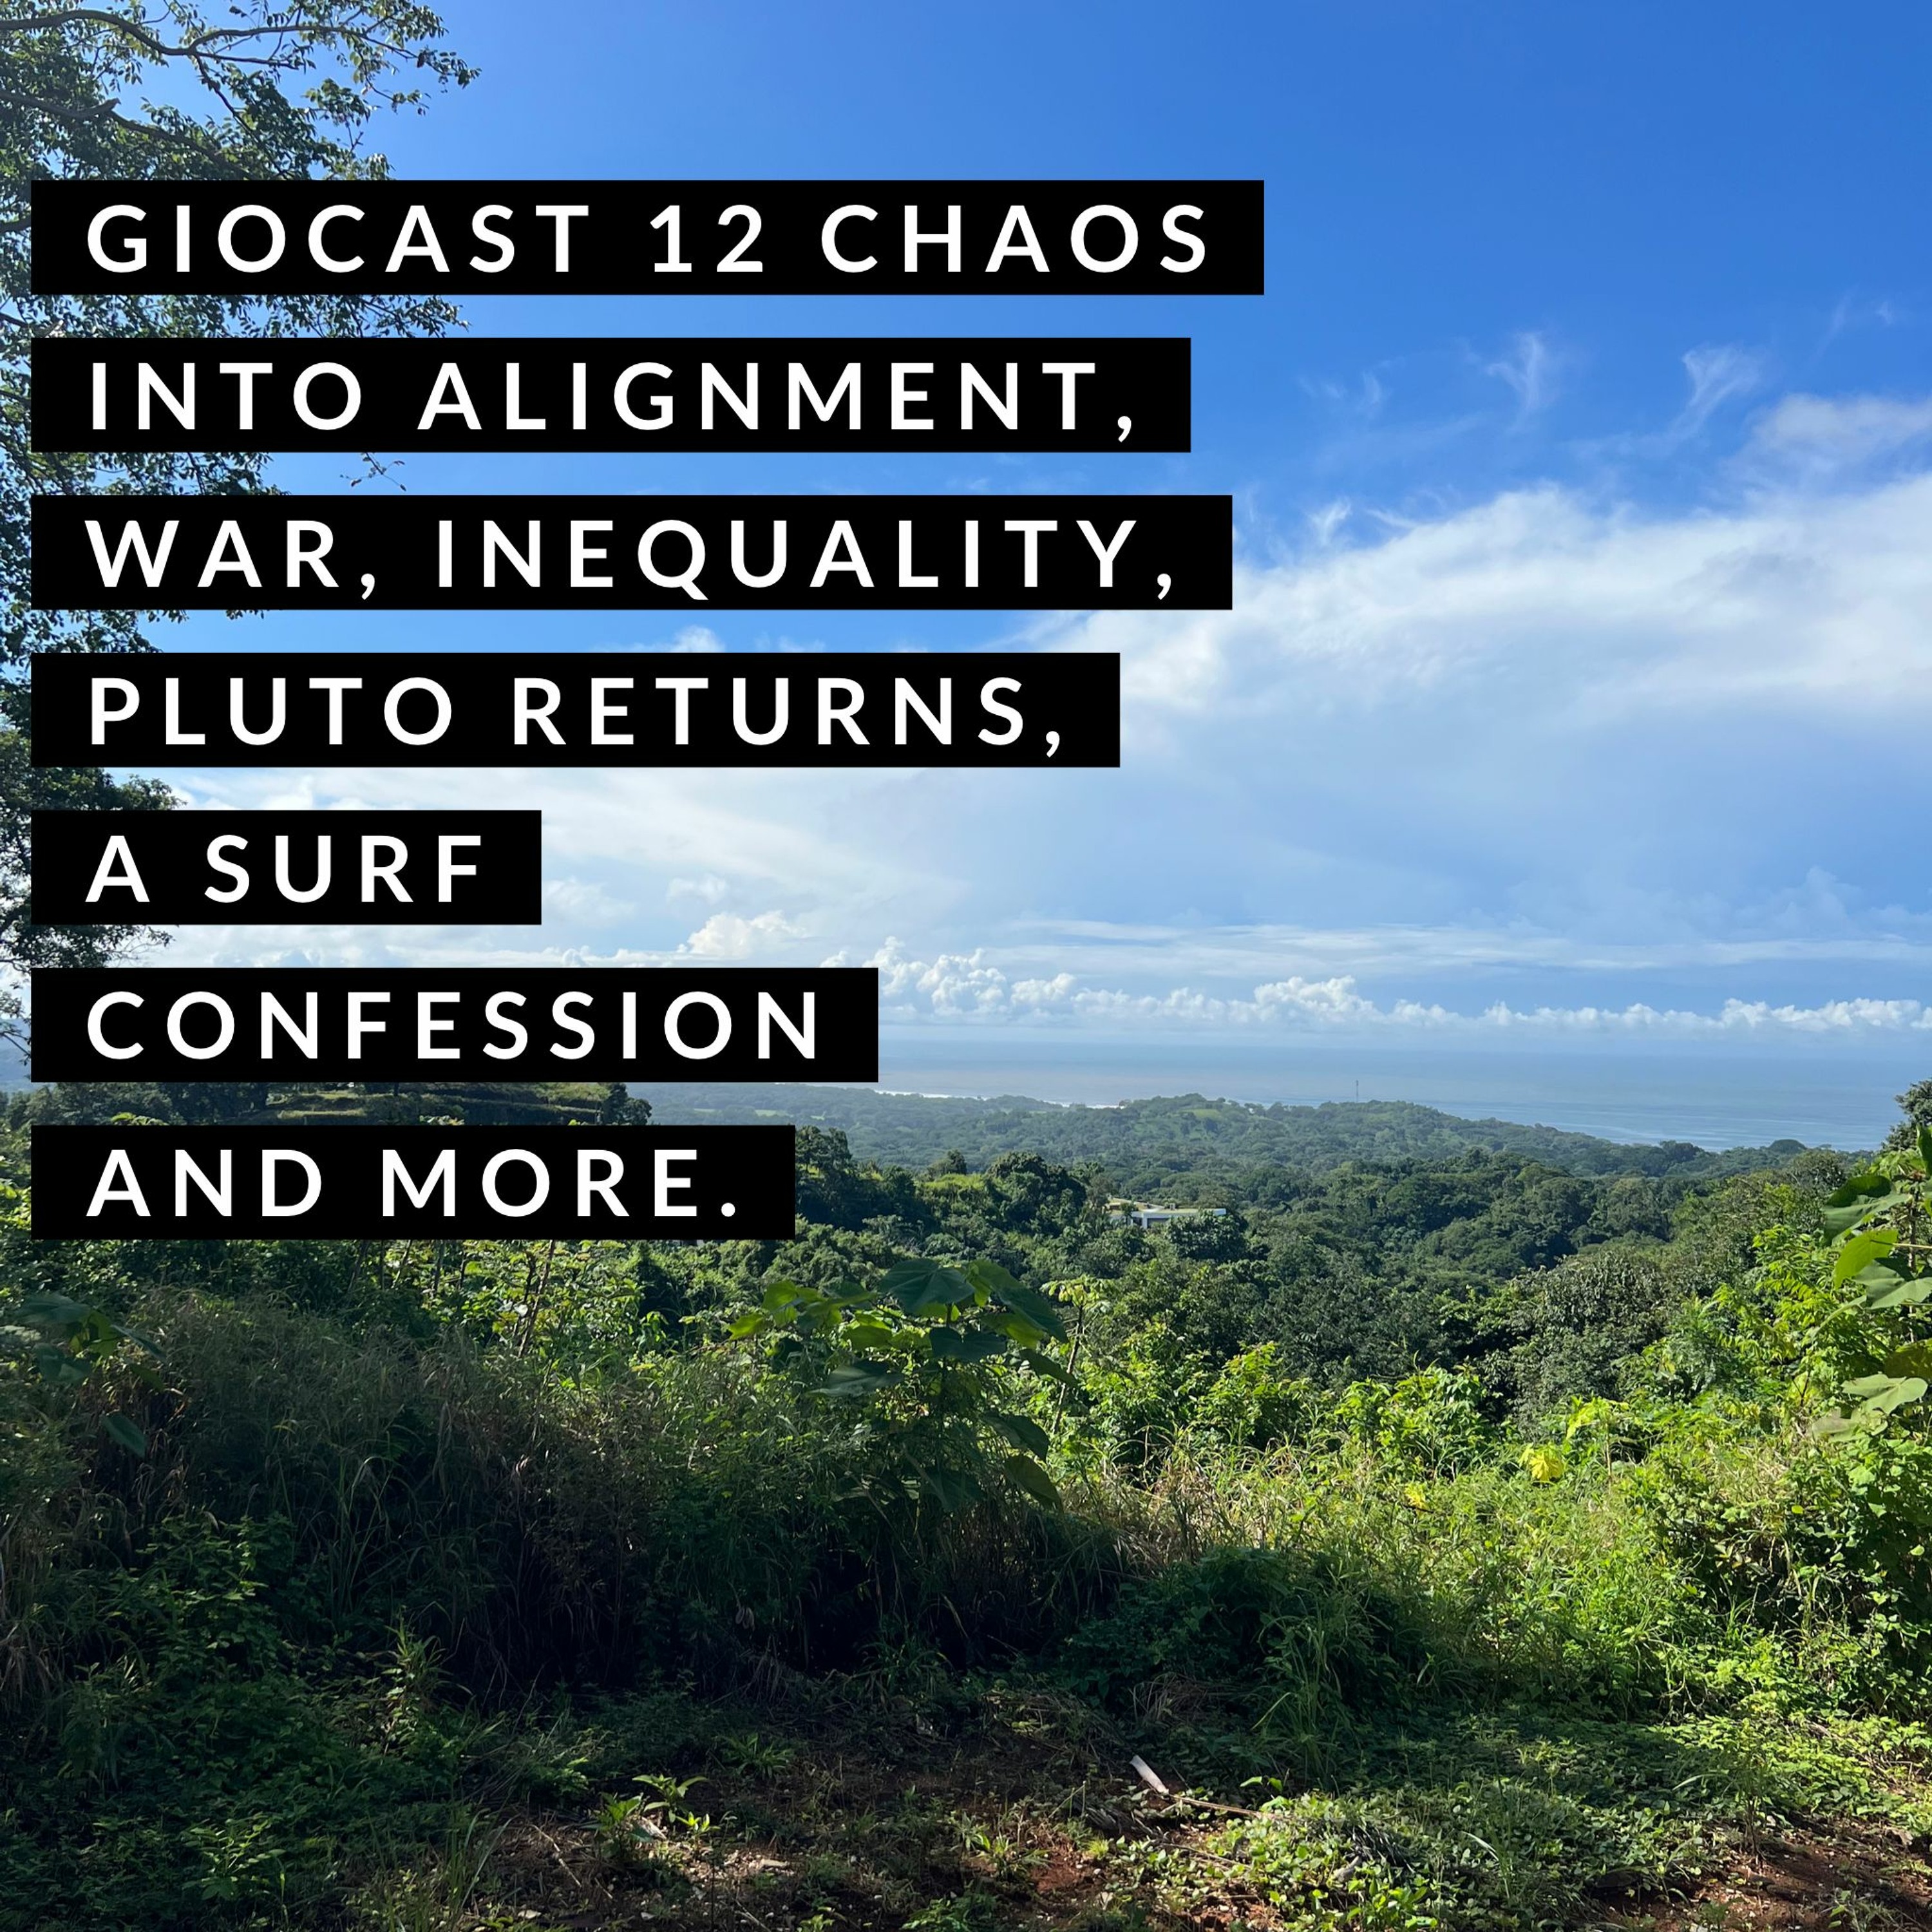 Giocast 12 - Pluto Return, World Events, Chaos Into Alignment, Inequality and more